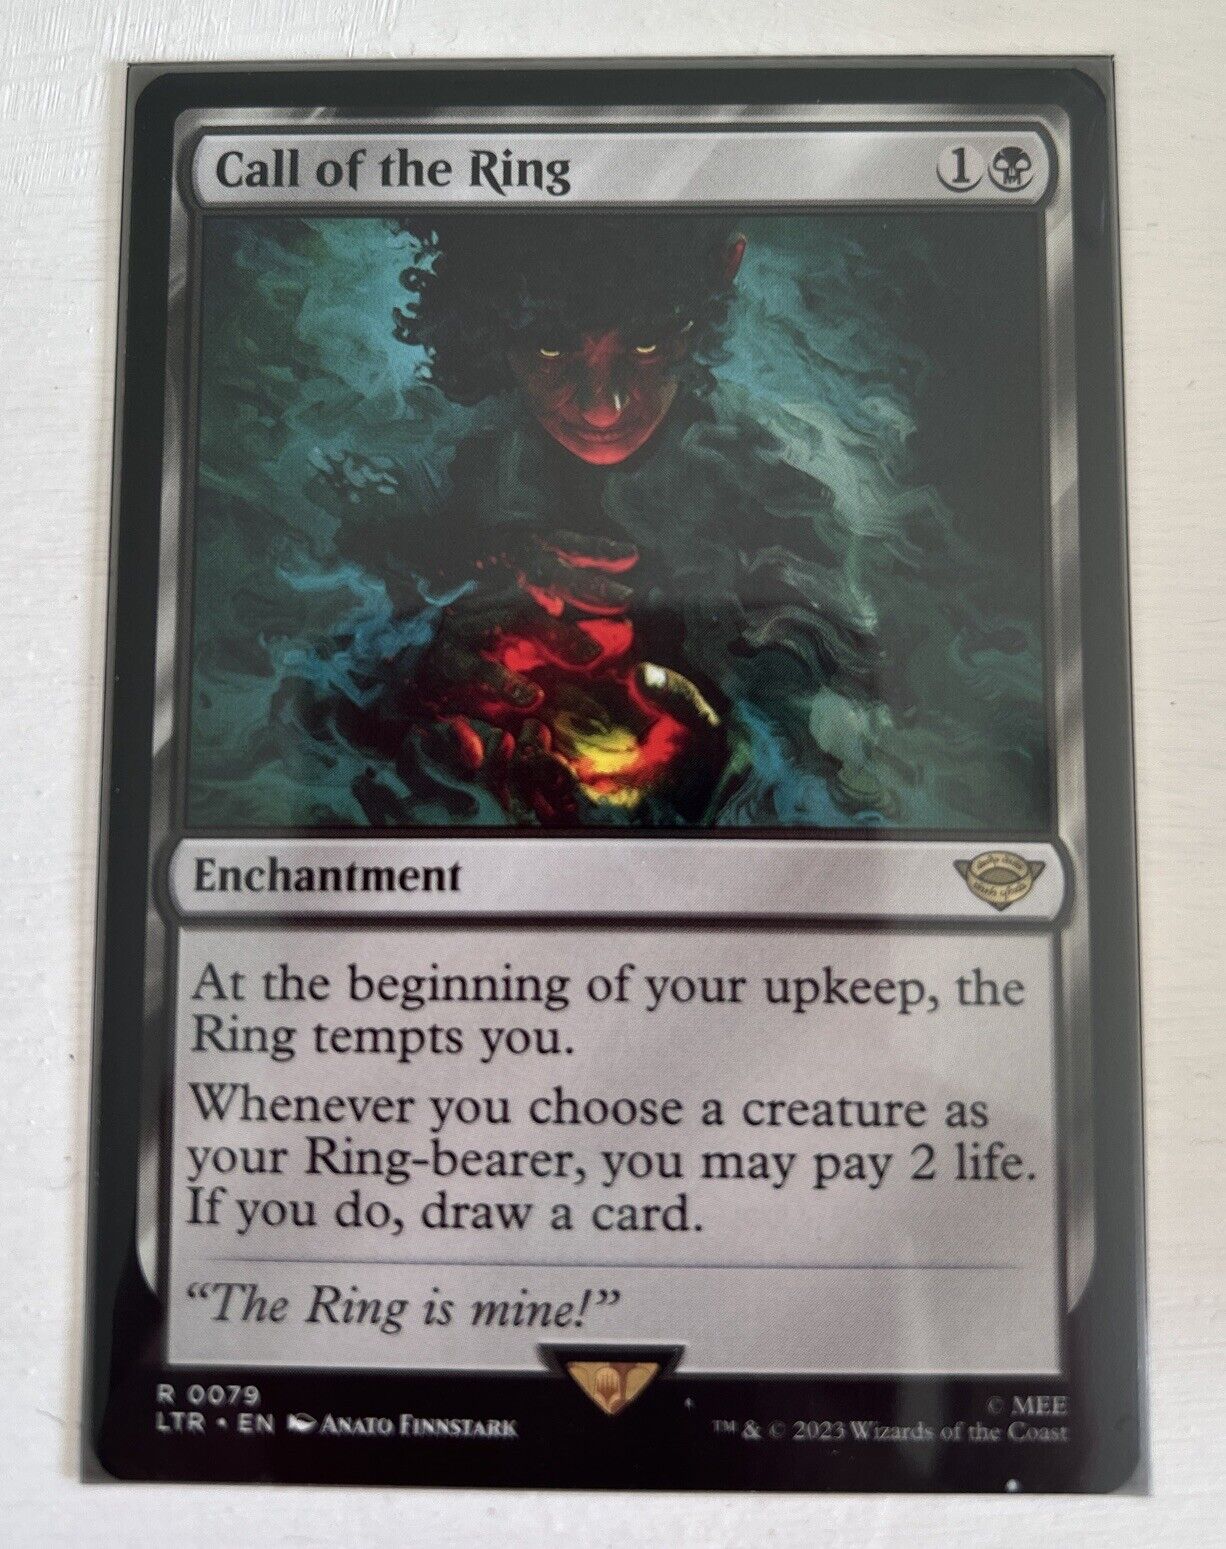 MTG lord of the rings - Call of the Ring rare R 0079